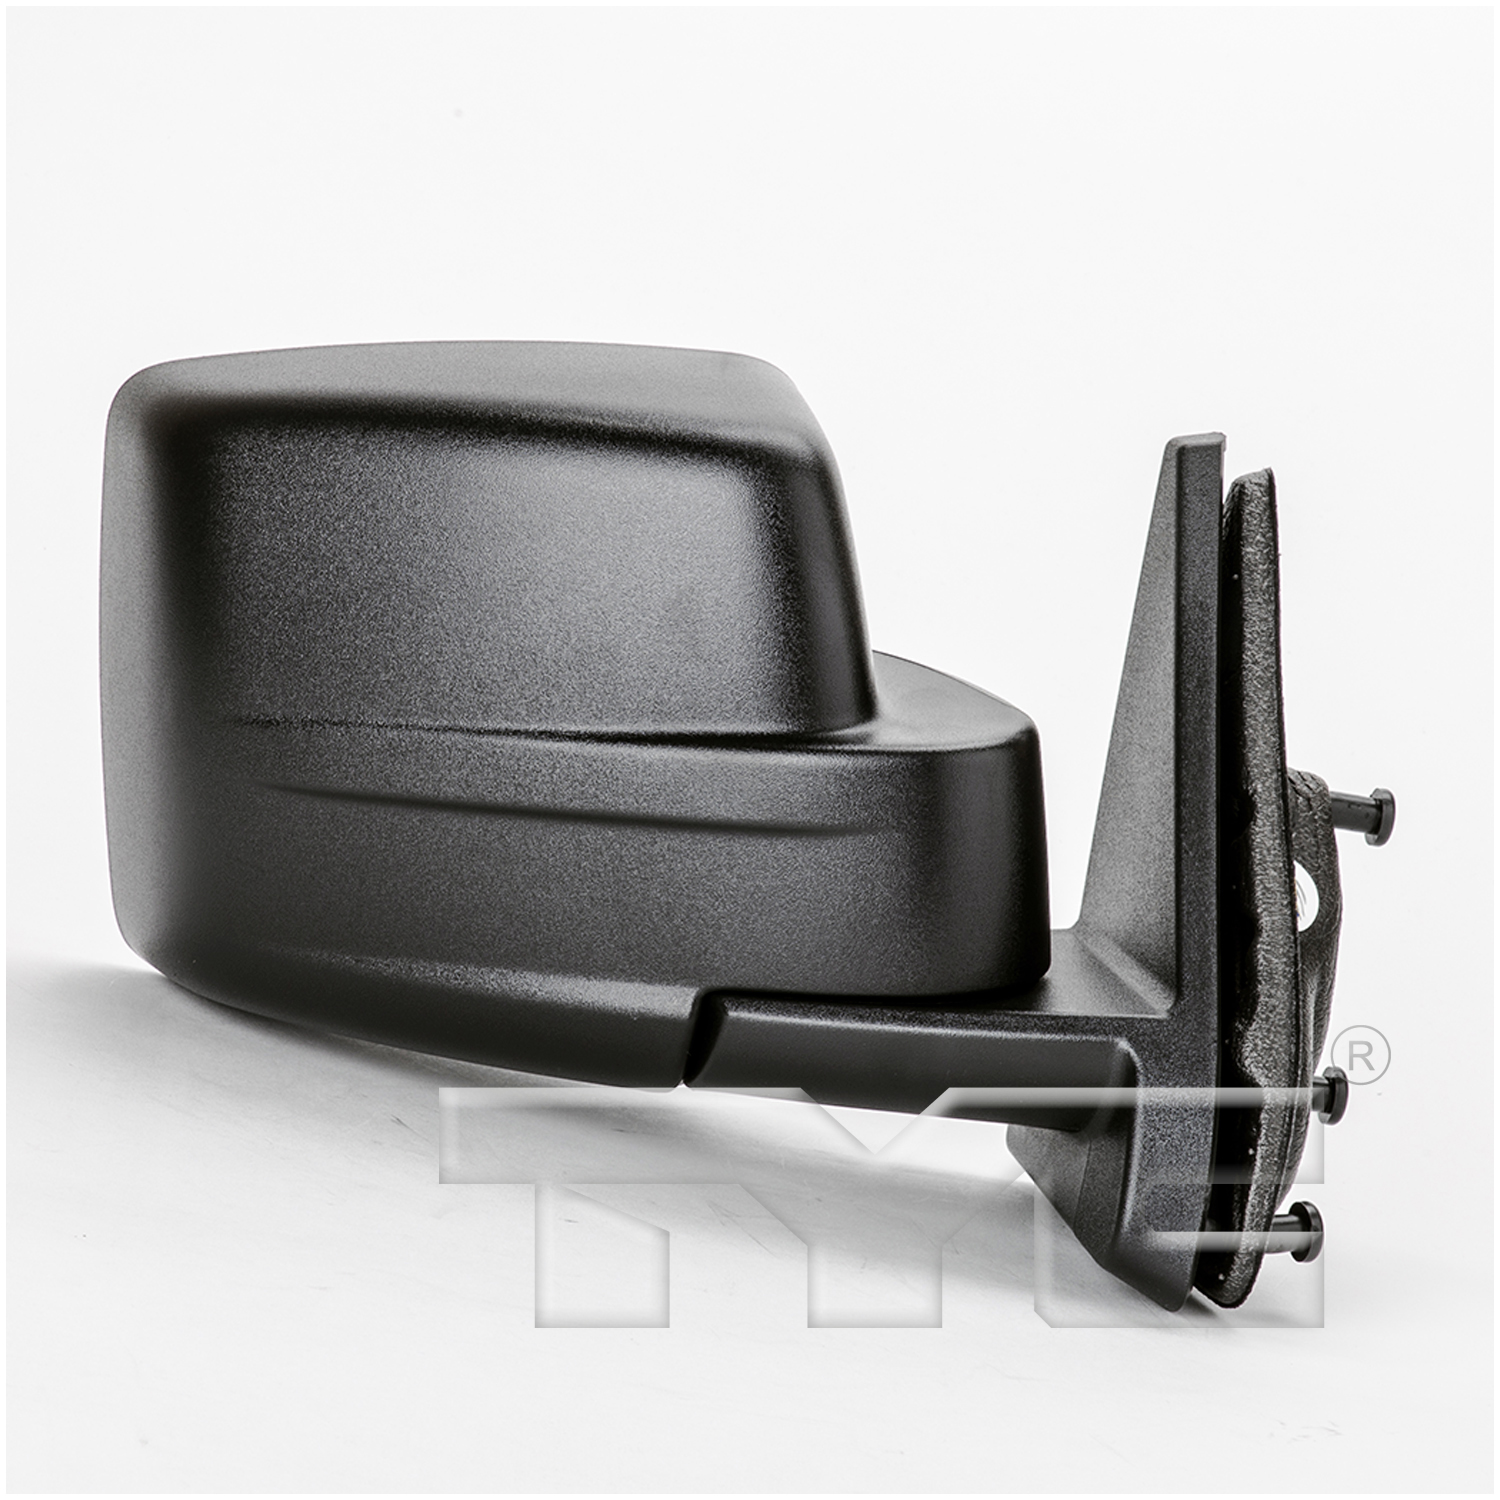 Aftermarket MIRRORS for JEEP - PATRIOT, PATRIOT,07-17,RT Mirror outside rear view